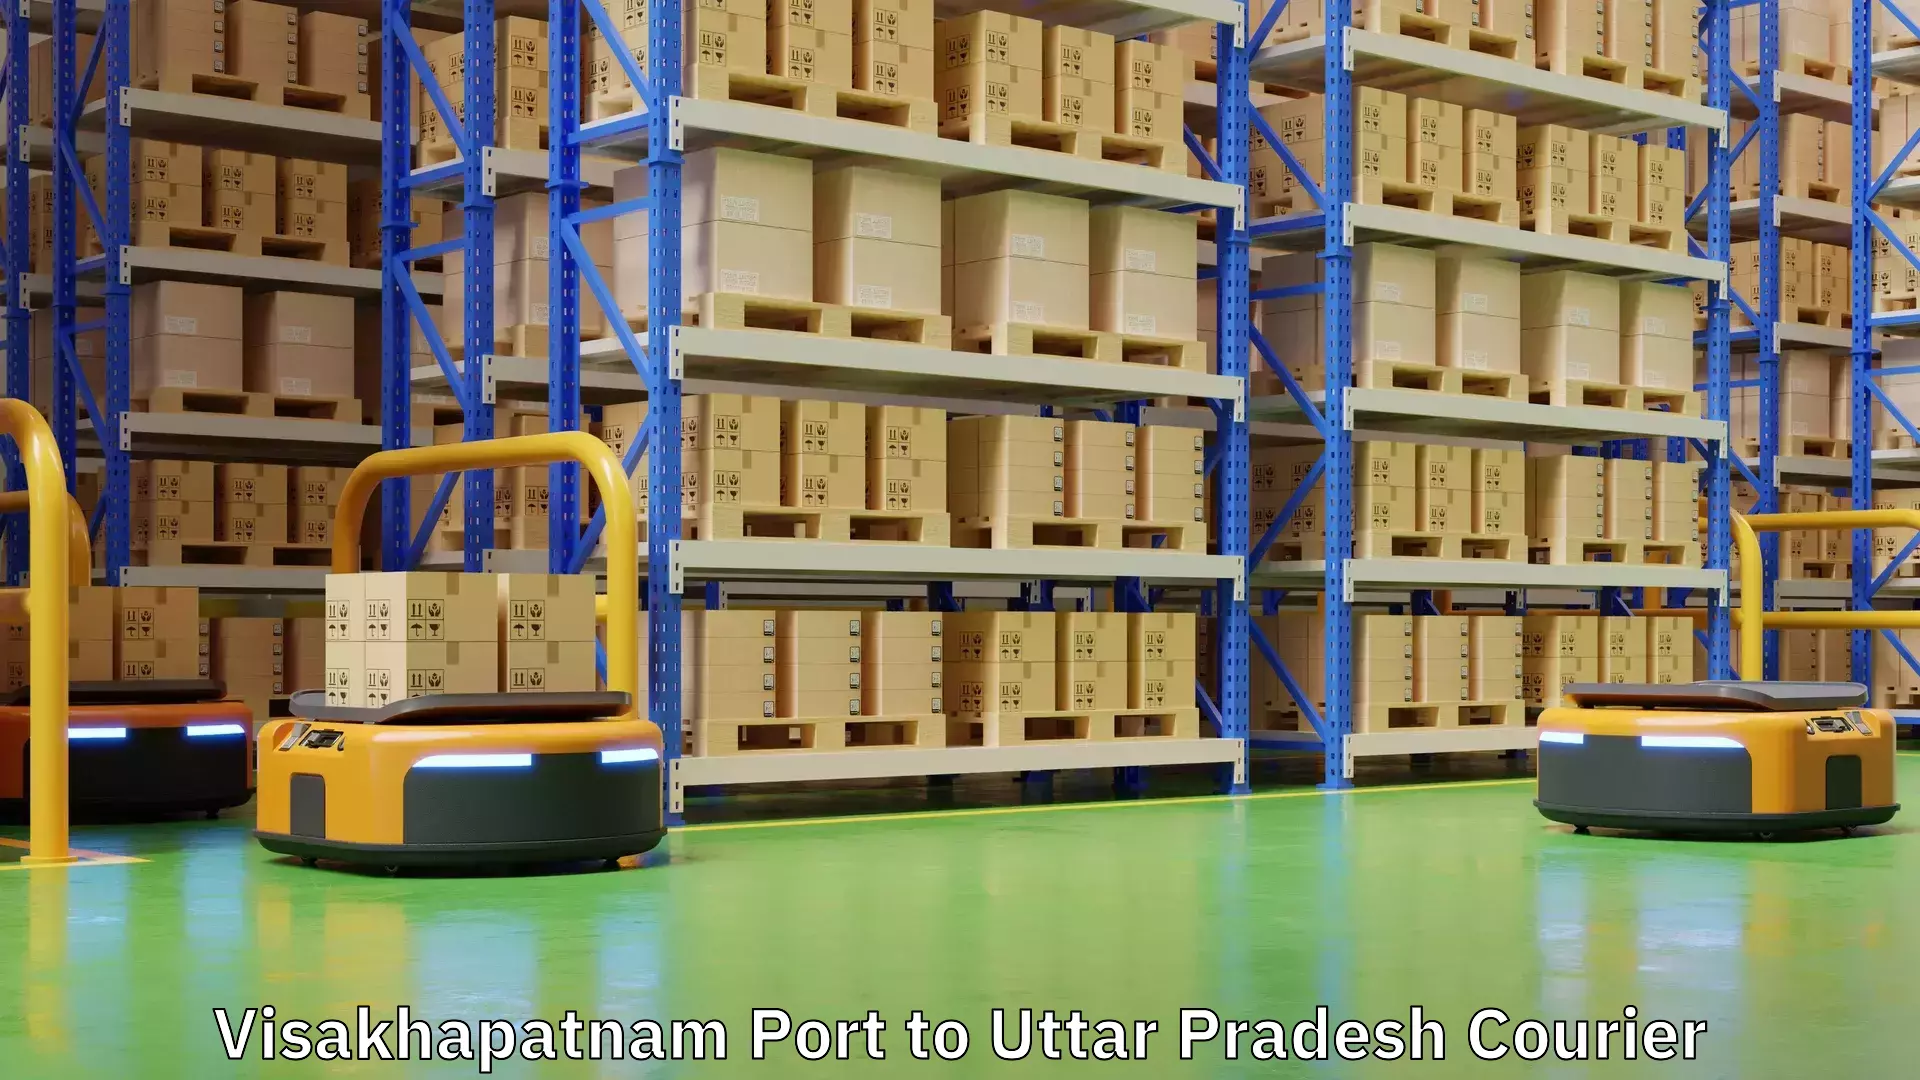 Reliable courier service in Visakhapatnam Port to Uttar Pradesh